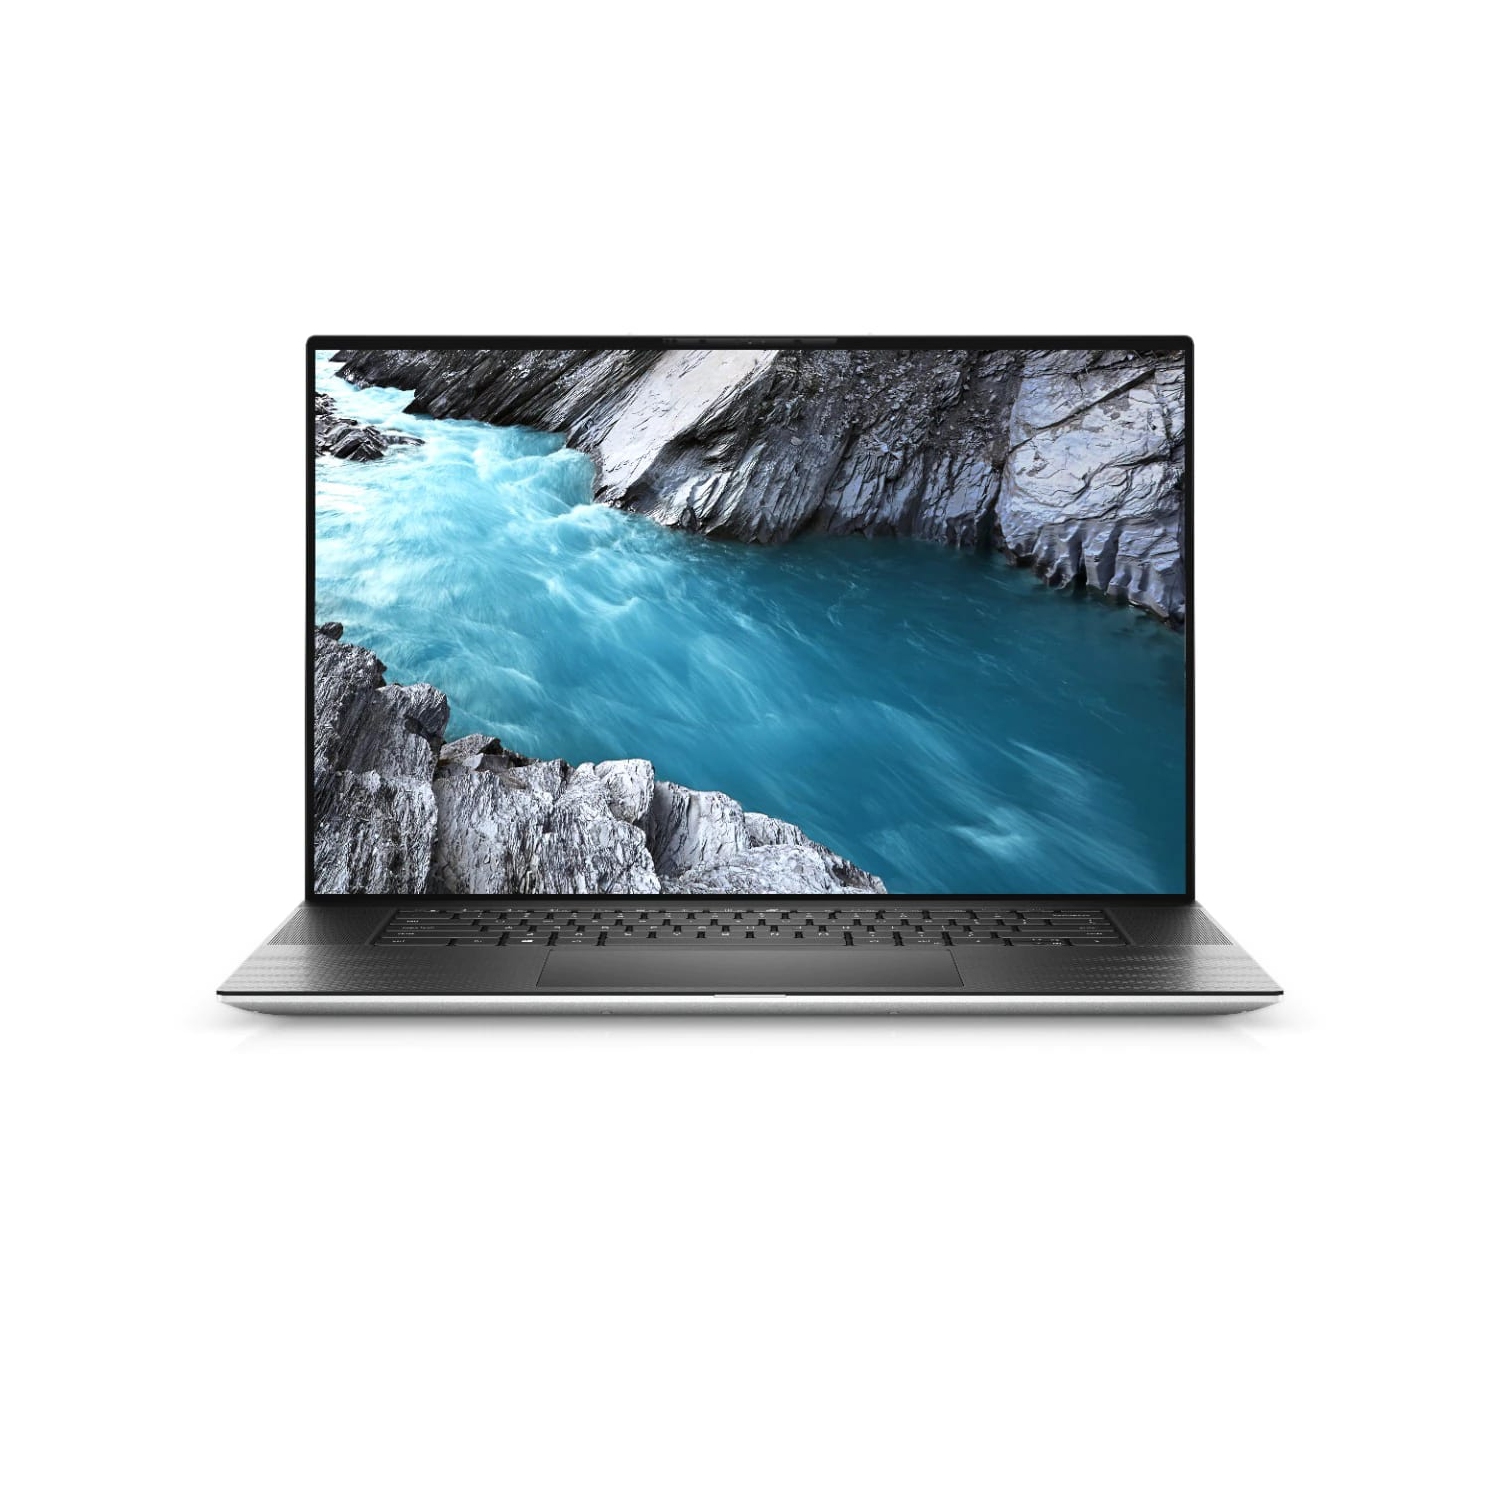 Refurbished (Excellent) - Dell XPS 17 9700 Laptop (2020) | 17" 4K Touch | Core i7 - 512GB SSD - 16GB RAM - 1650 Ti | 6 Cores @ 5 GHz - 10th Gen CPU Certified Refurbished